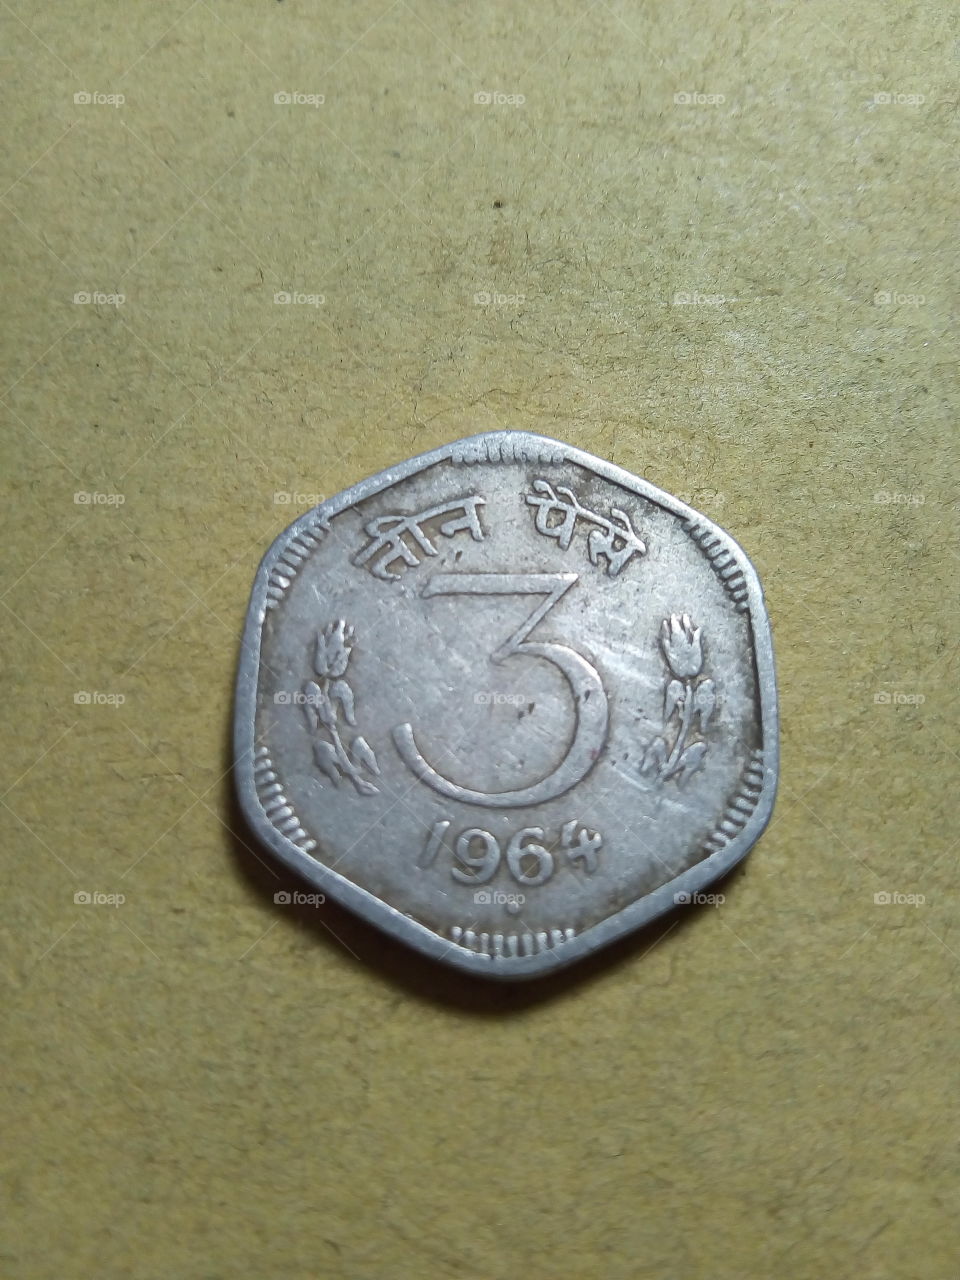 A coin of three paise- 1/33.33 share of Indian Rupee issued by Government of India in 1964.